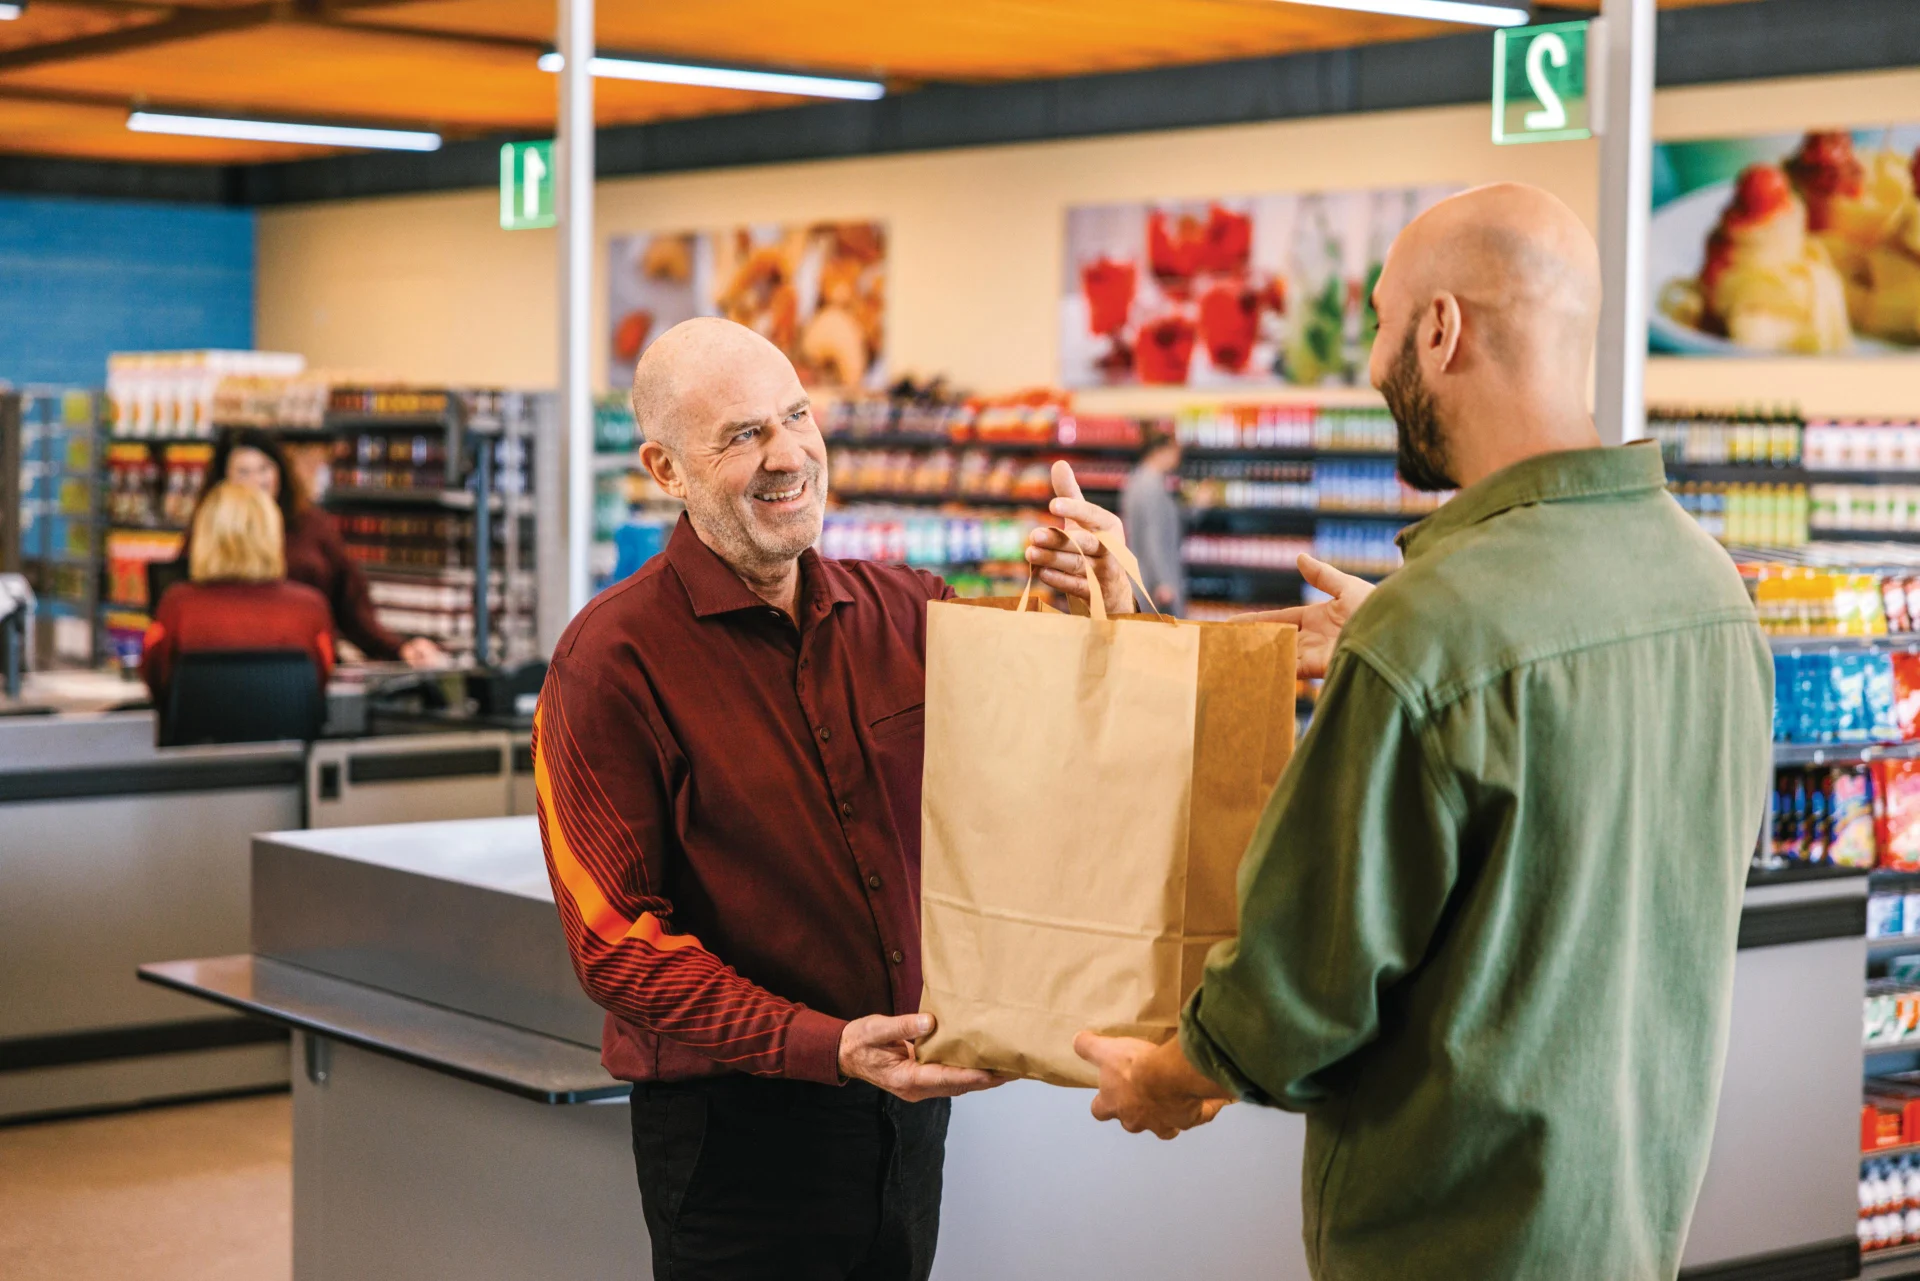 A Migros employee hands the full shopping bag to the customer